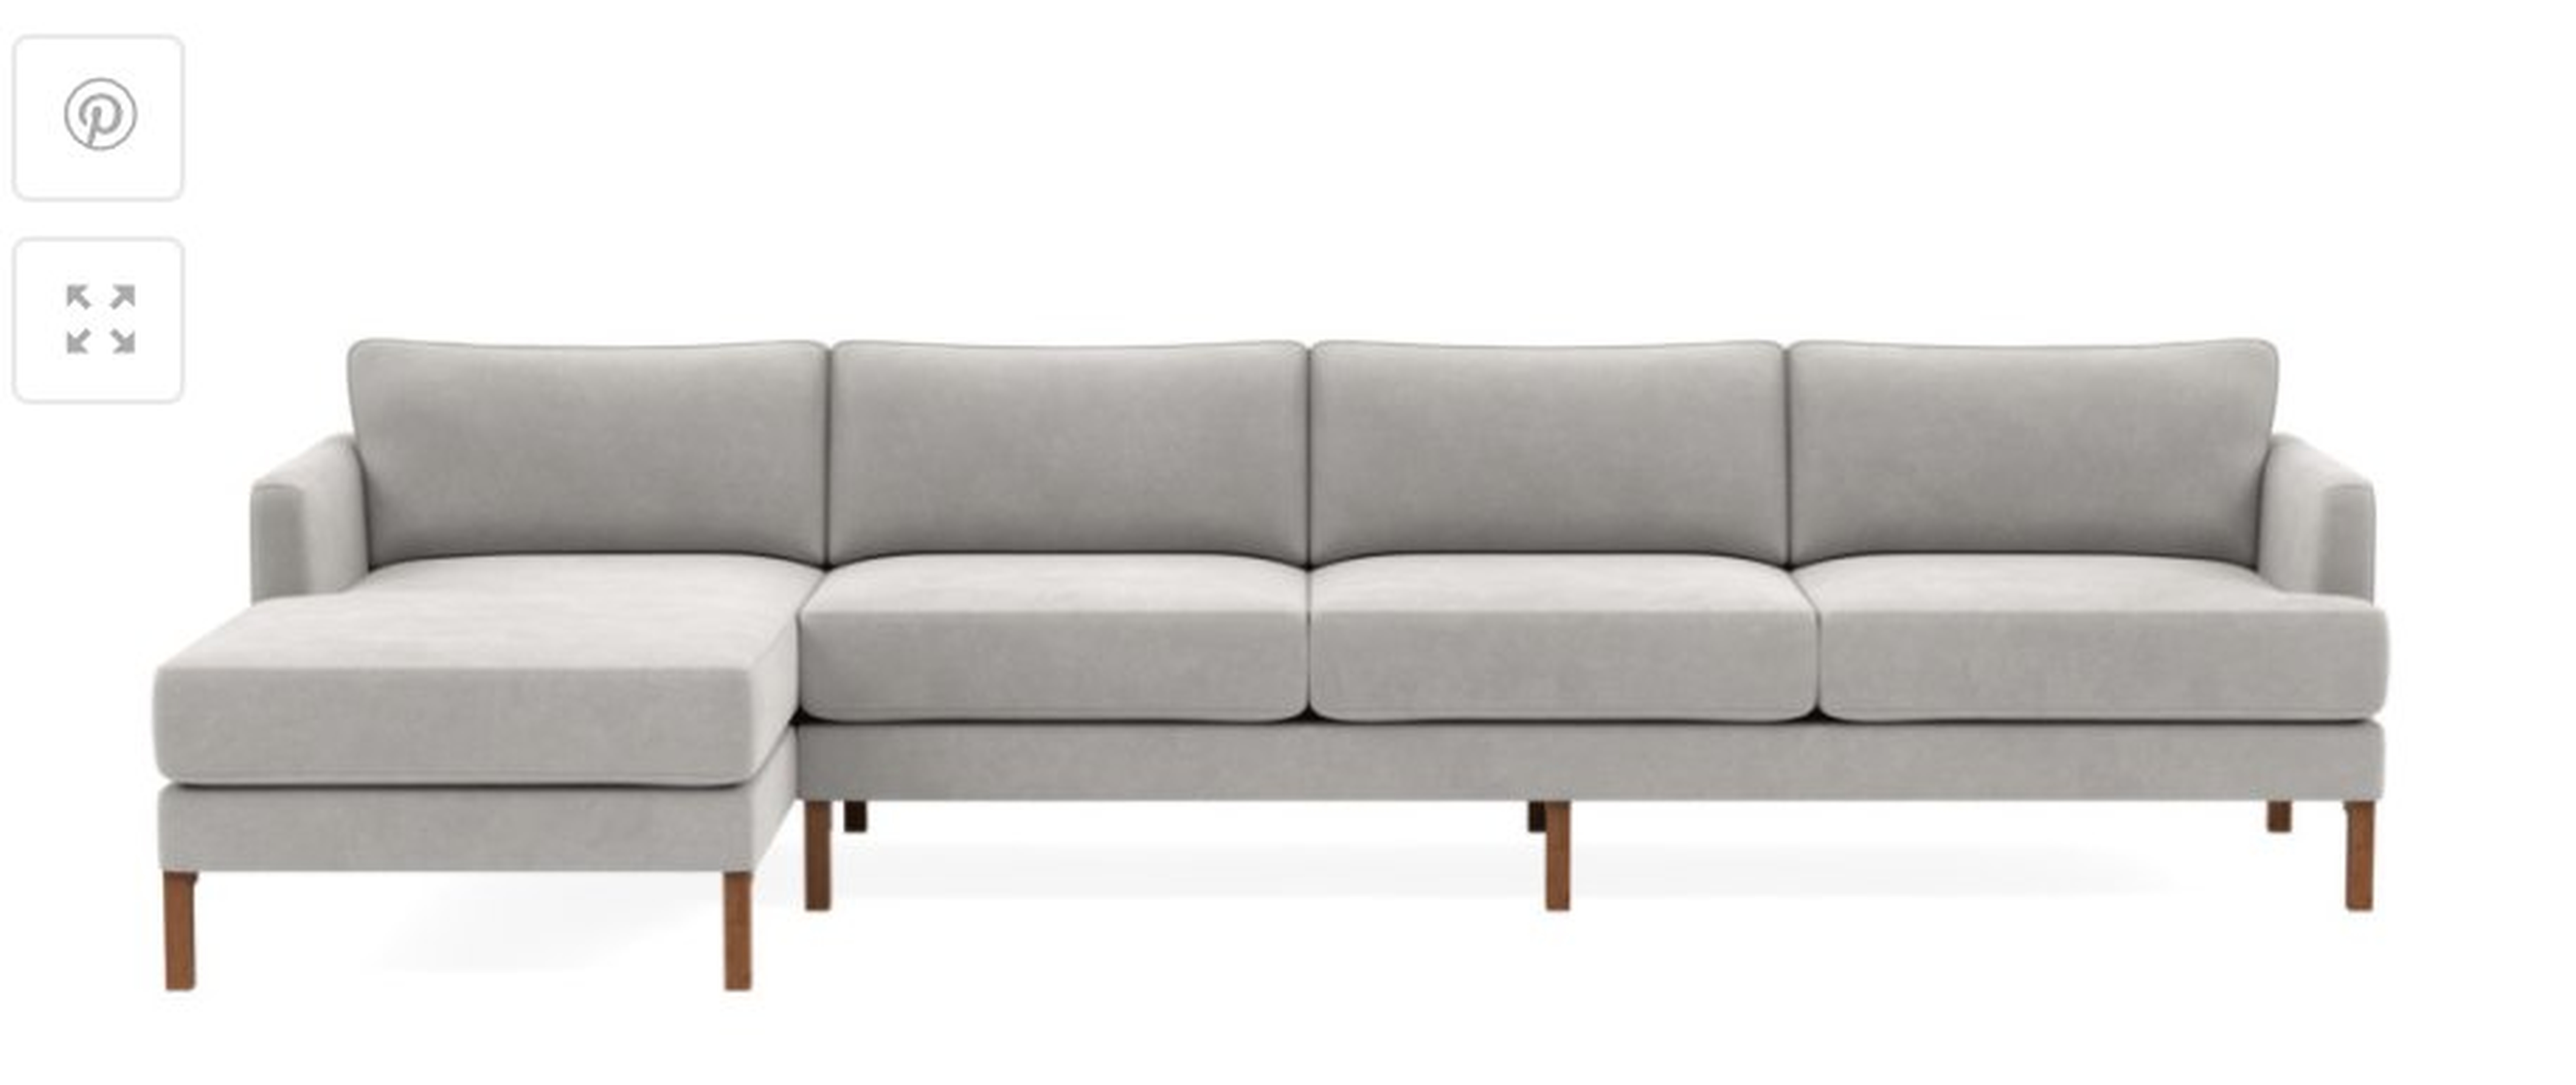 Winslow 4 seat left chaise sectional - Interior Define